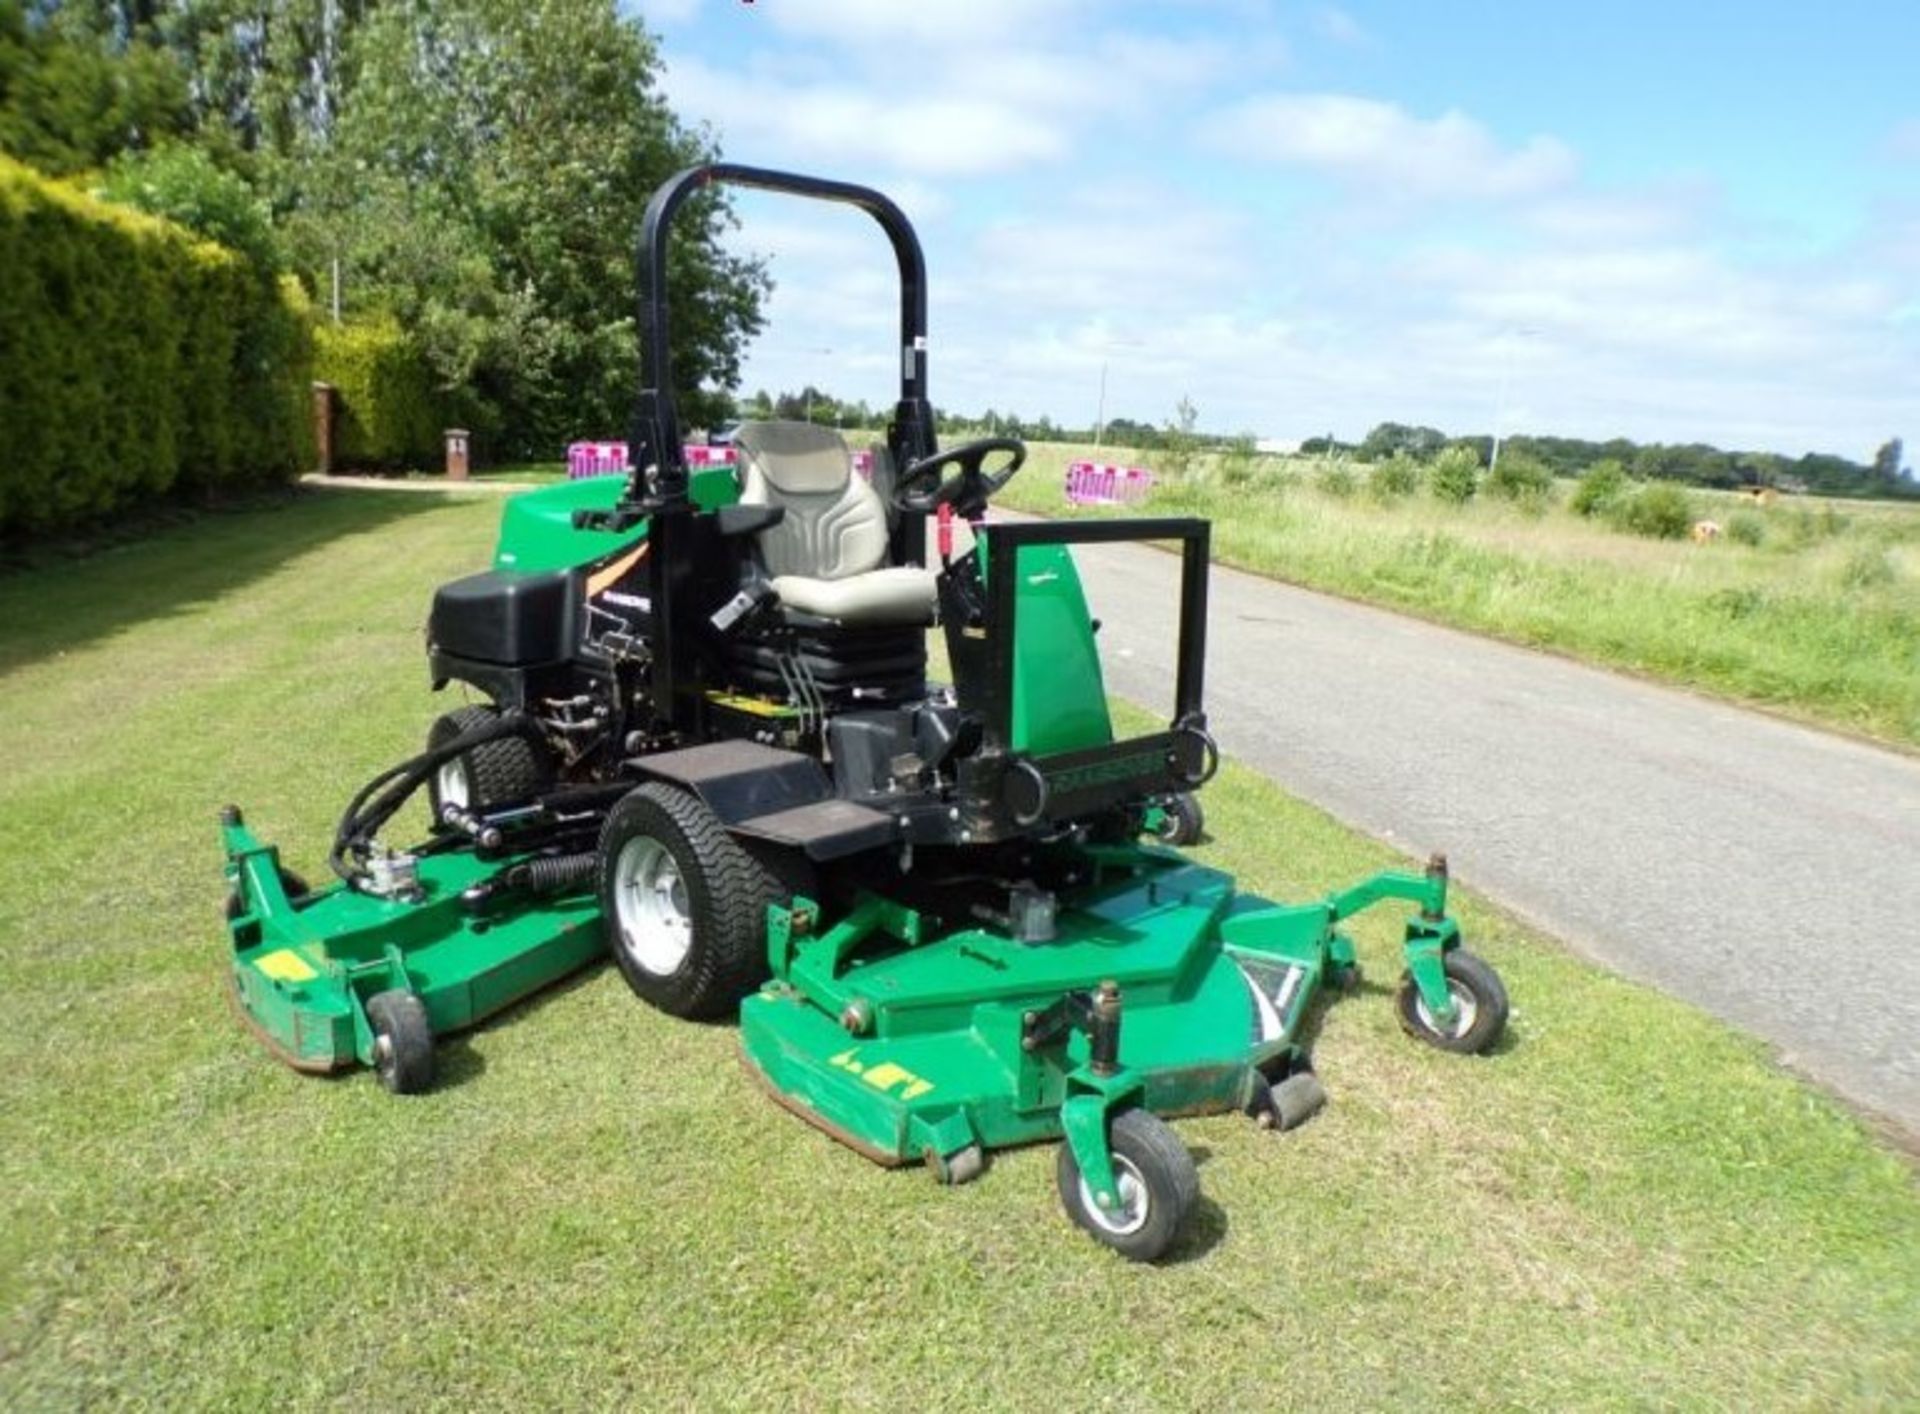 RANSOMES HR6010 RIDE ON MOWER BATWING 4 CYLINDER D